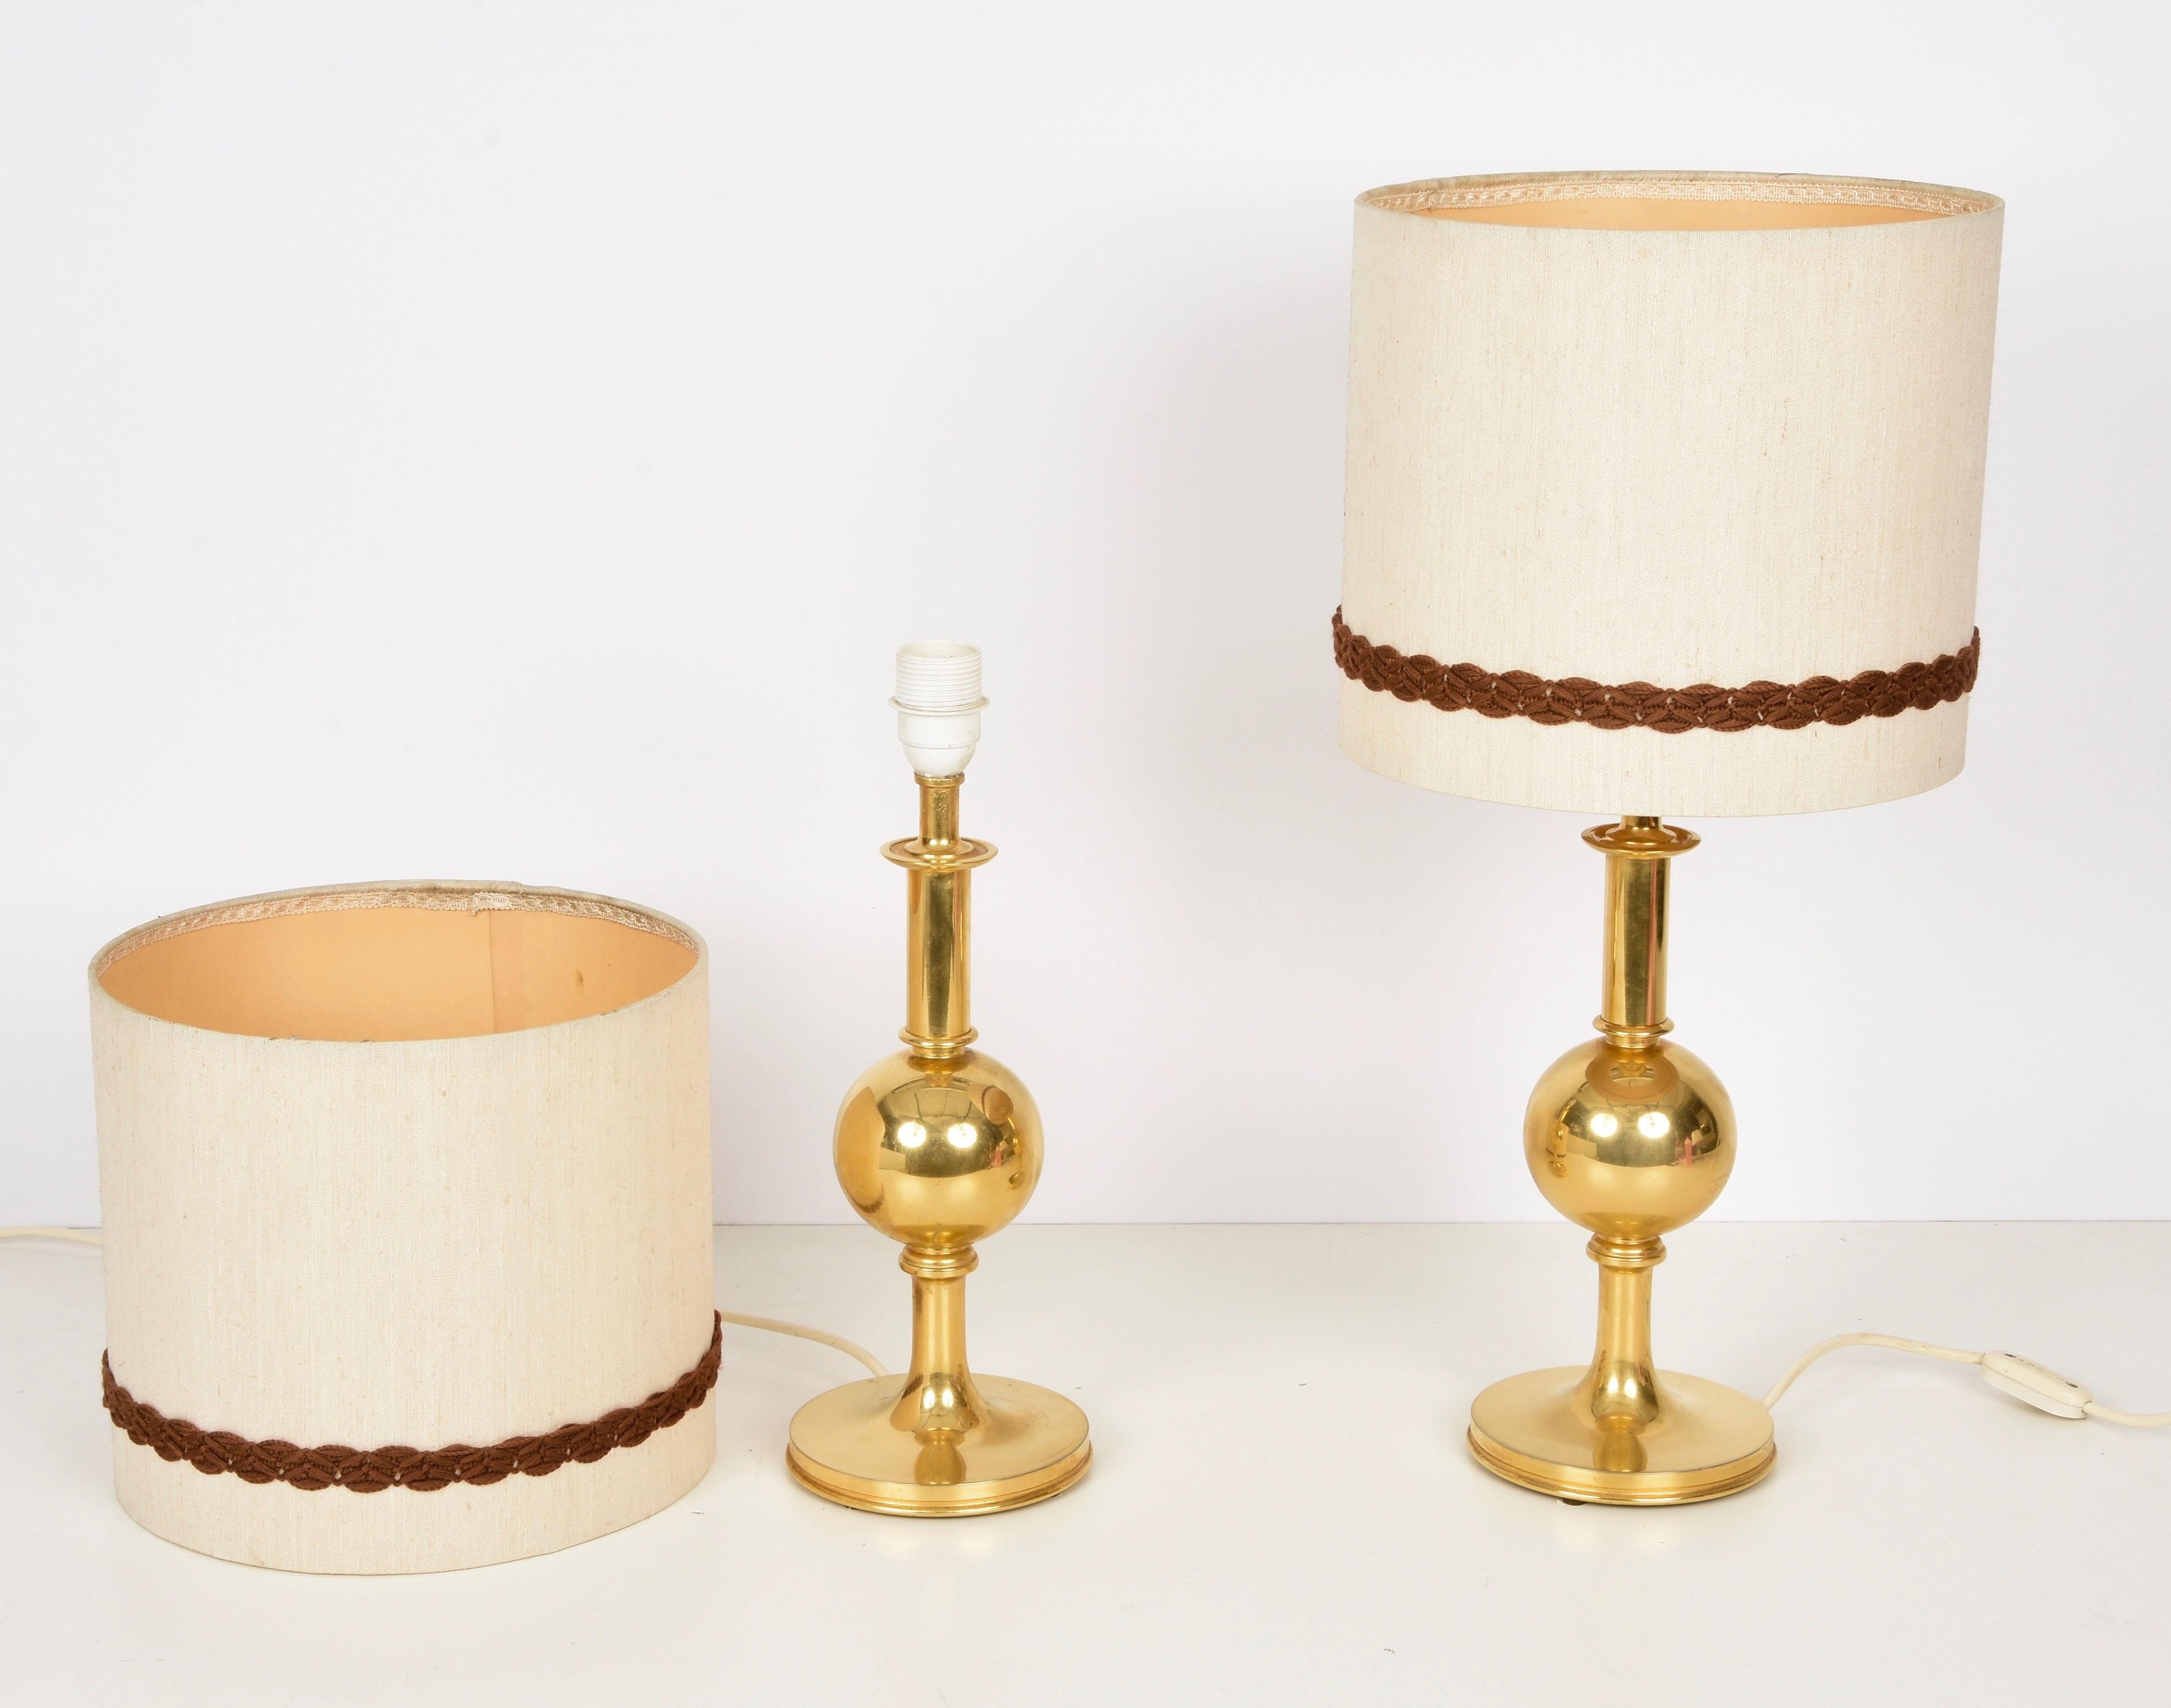 Midcentury 24K gold solid brass table lamps. These fantastic lamps were produced in Italy during the 1980s

You are going to love the solid structure and the mix of cylindrical, in the top and the bottom, and spherical parts and they both mount a